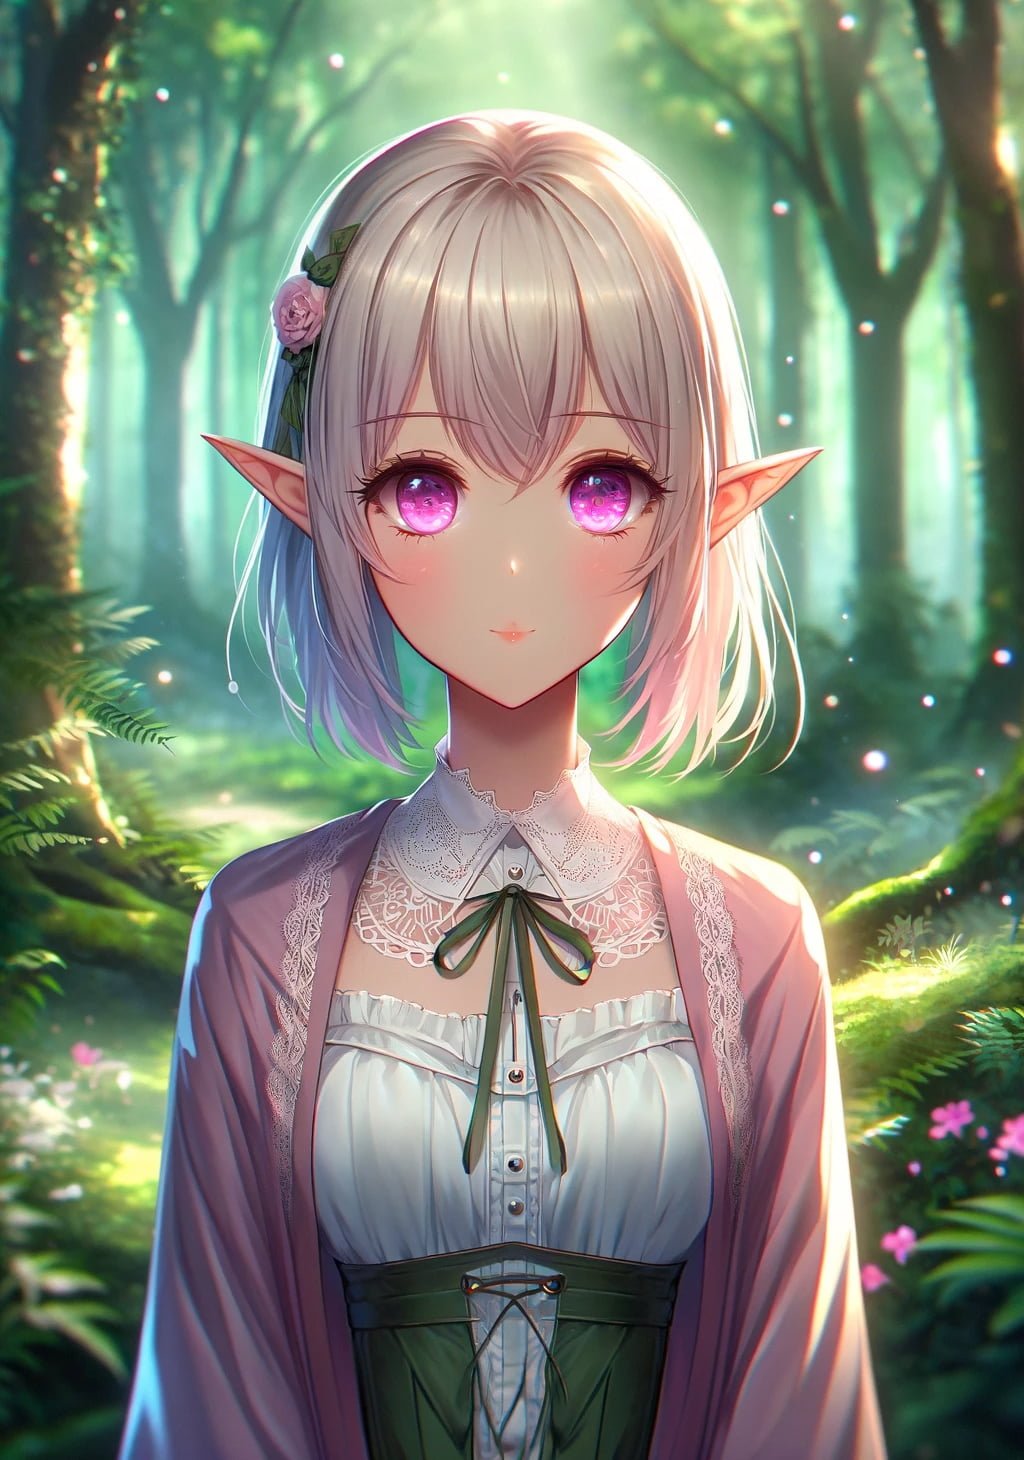 Young elf-like girl with pink eyes in school uniform